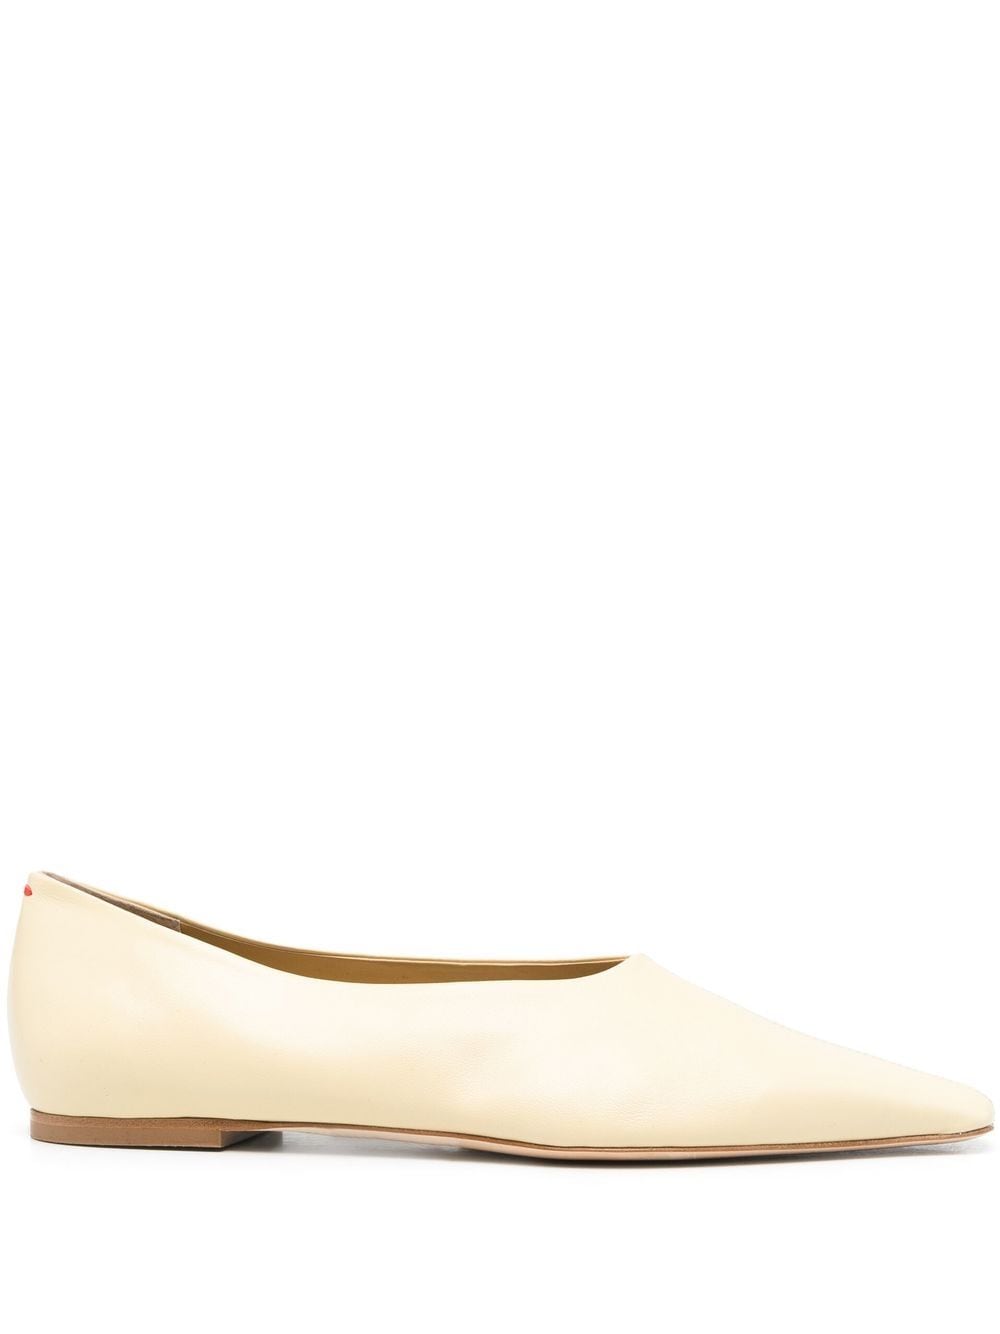 Aeyde Leather Ballerina Shoes - Farfetch